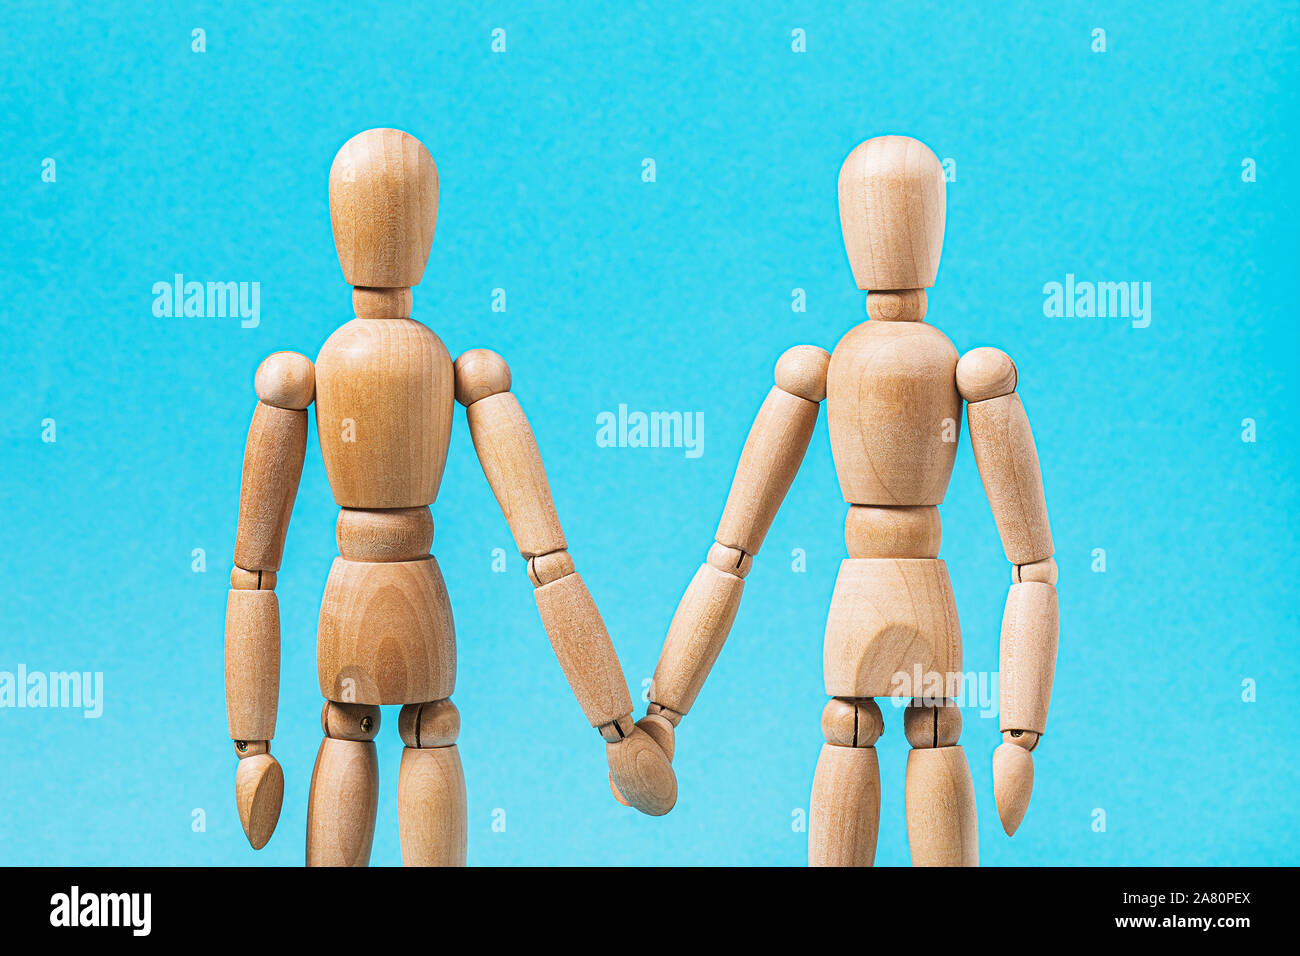 Relationship between people. Two wooden mannequins hold hands. Stock Photo